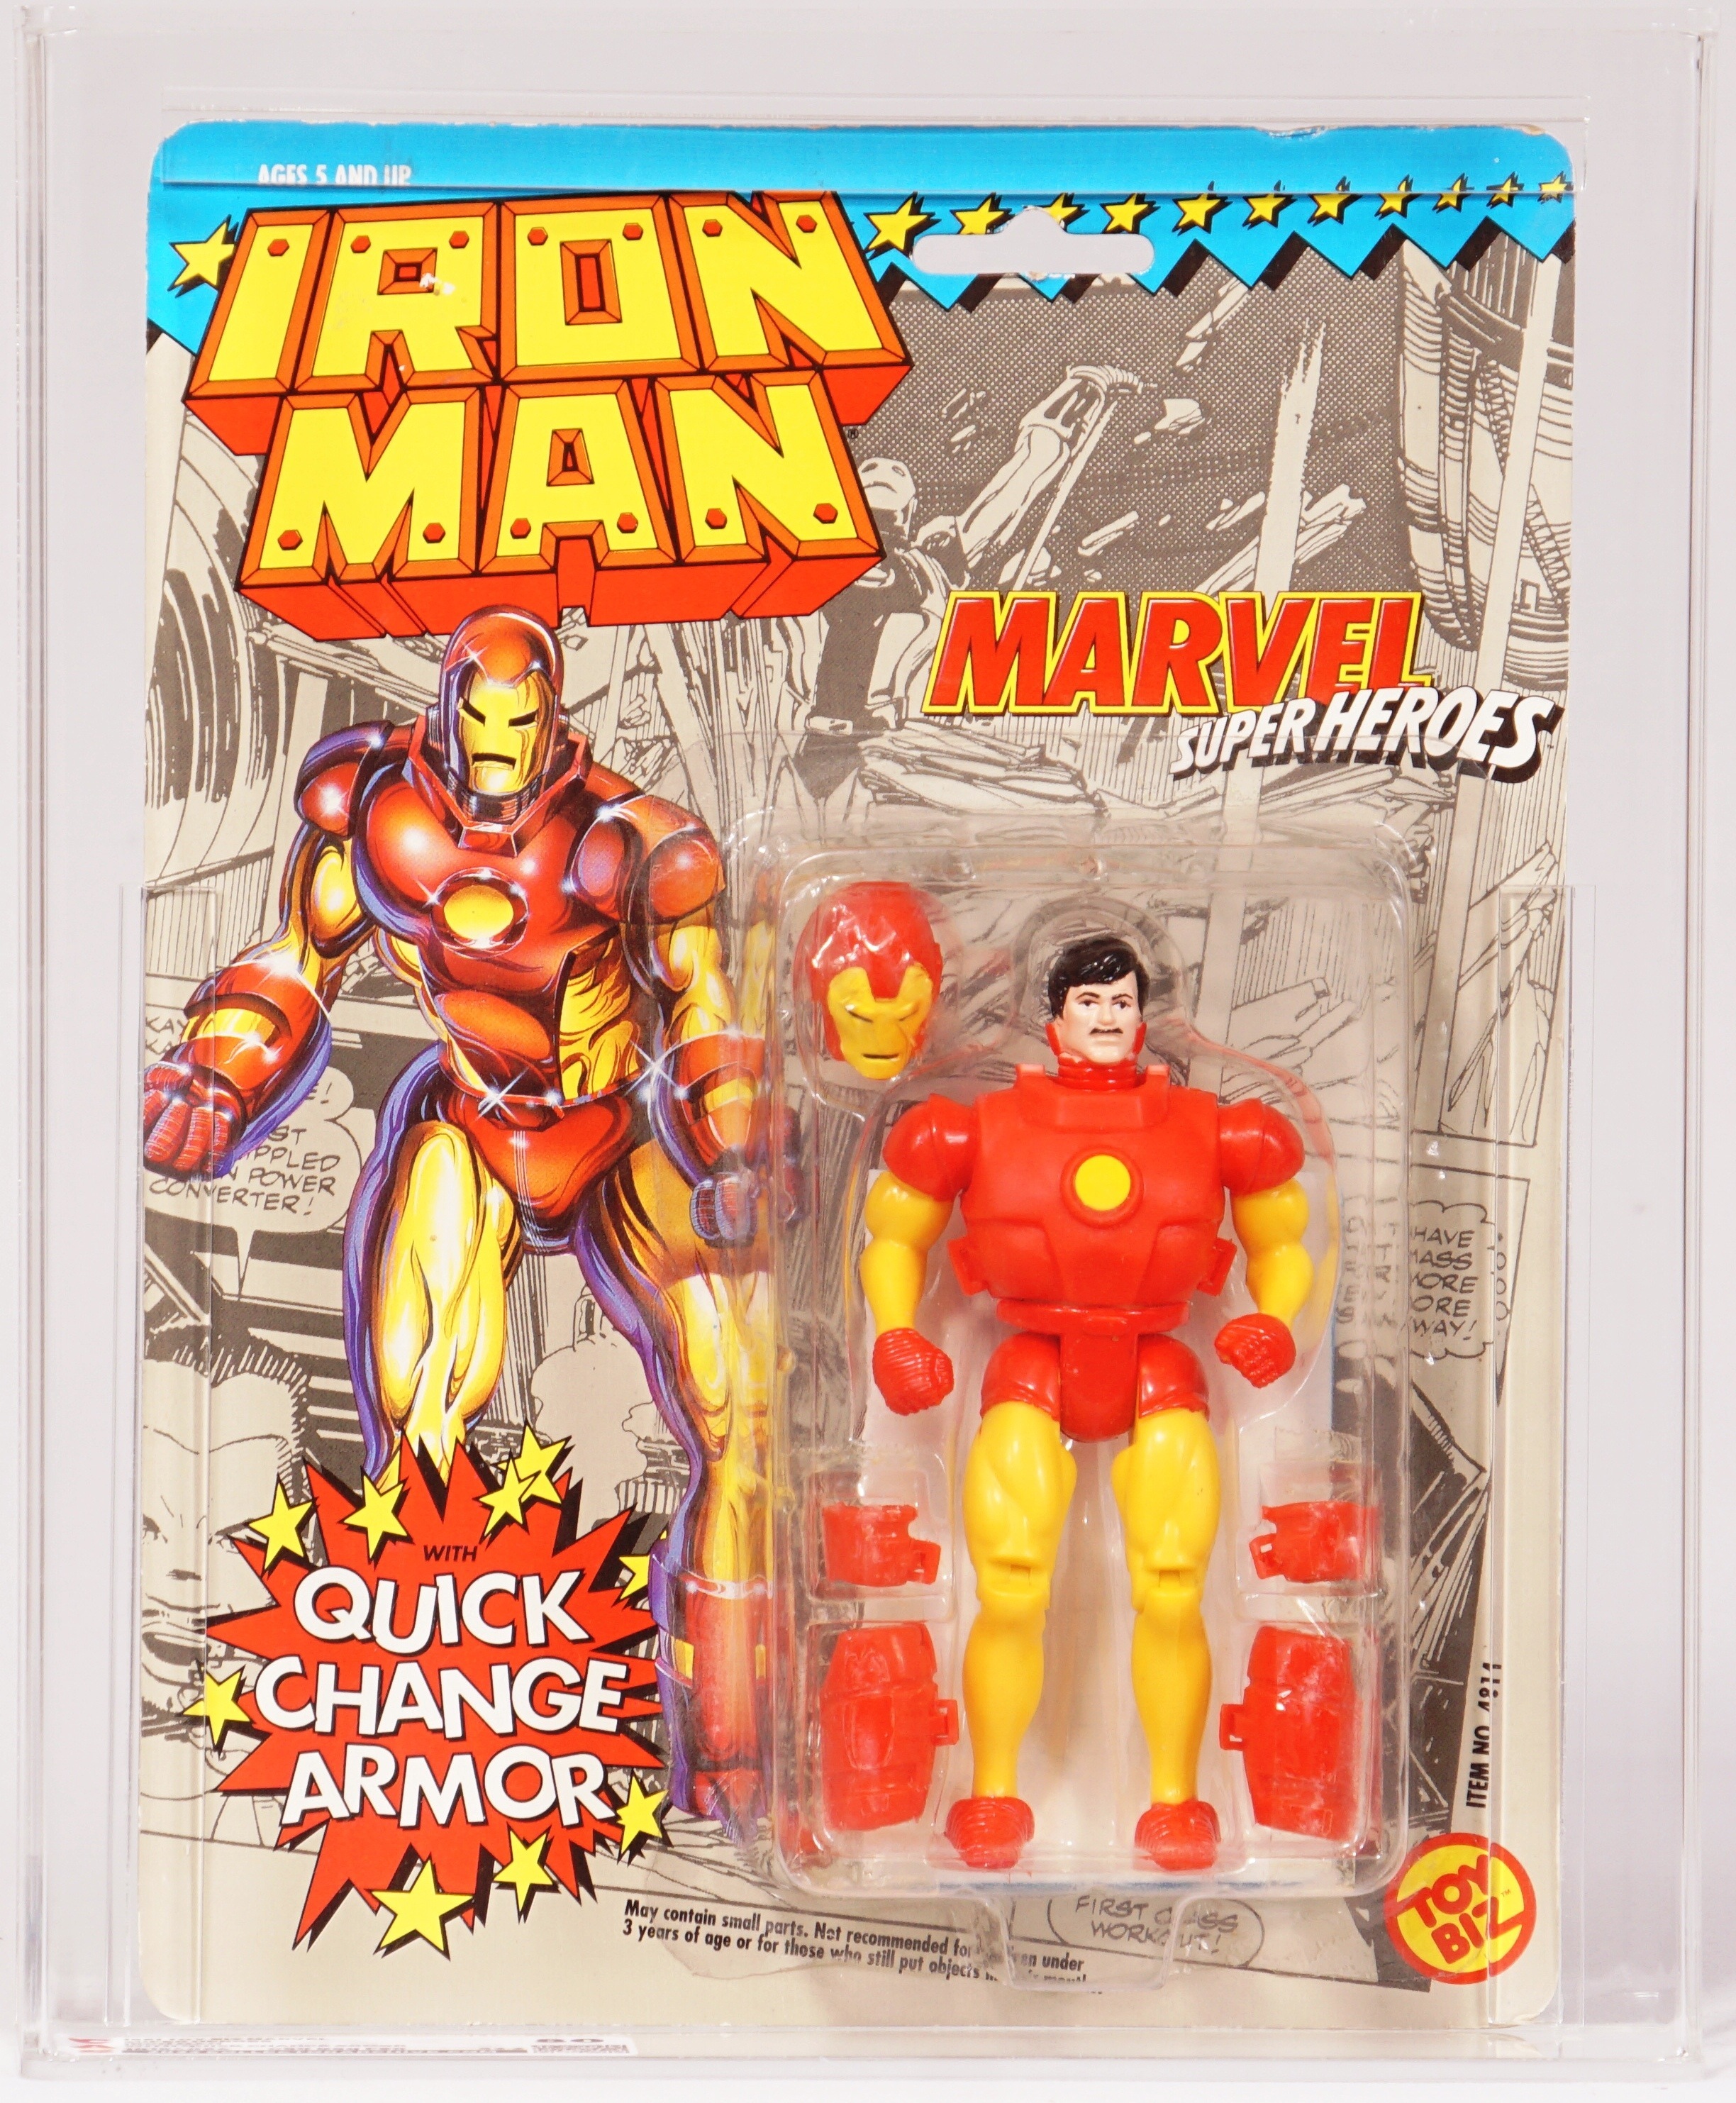 1991 Toy Biz Marvel Super Heroes Carded Action Figure - Iron Man